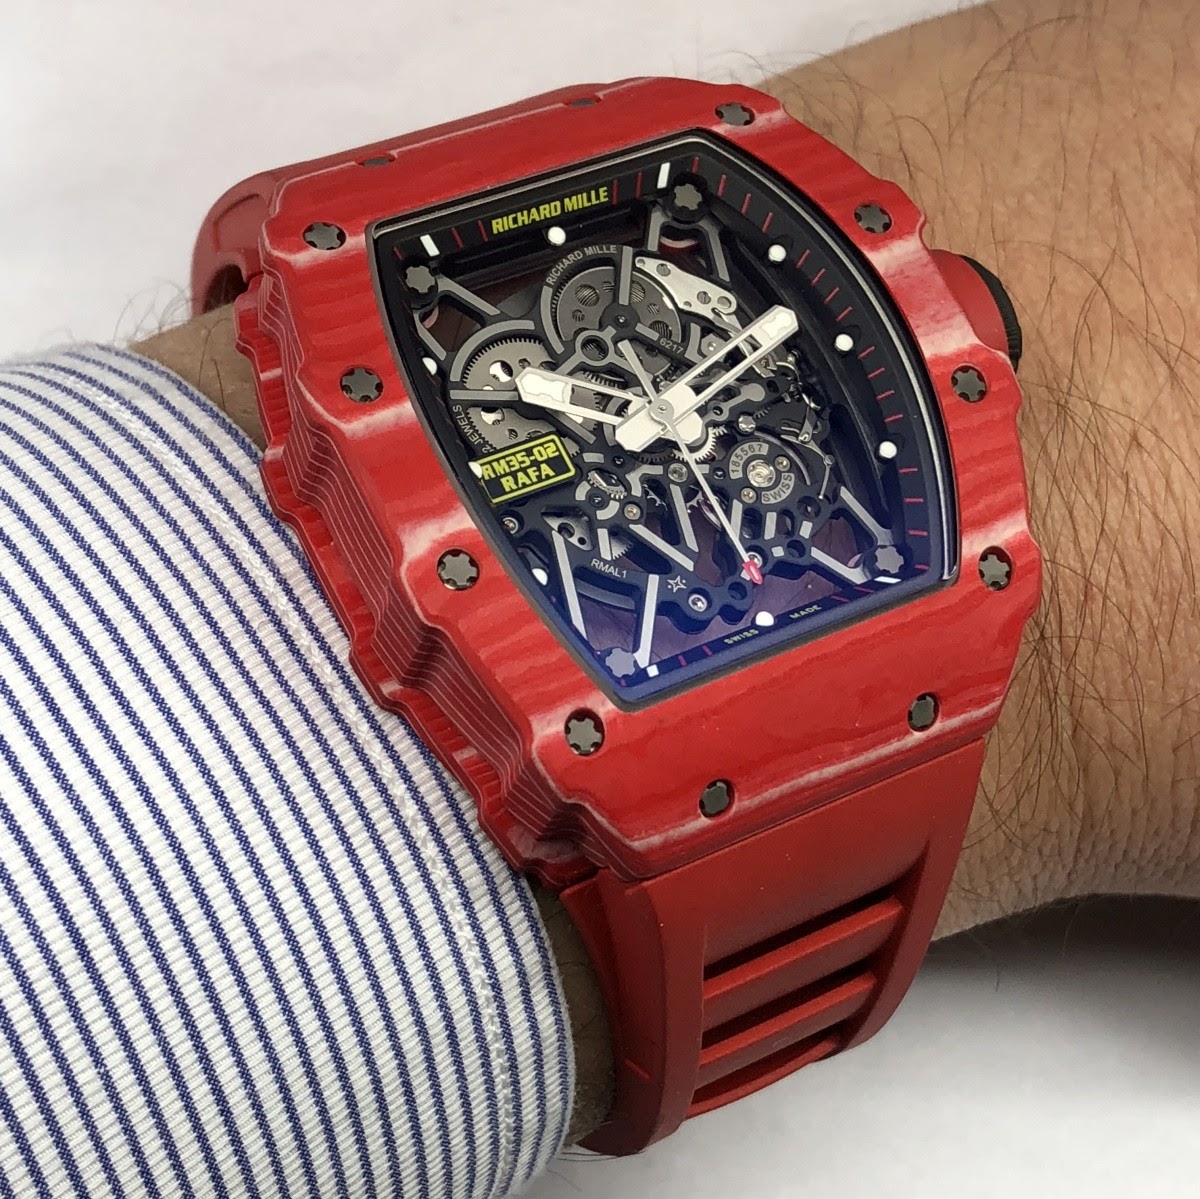 Richard Mille Hands on review of the Richard Mille RM35